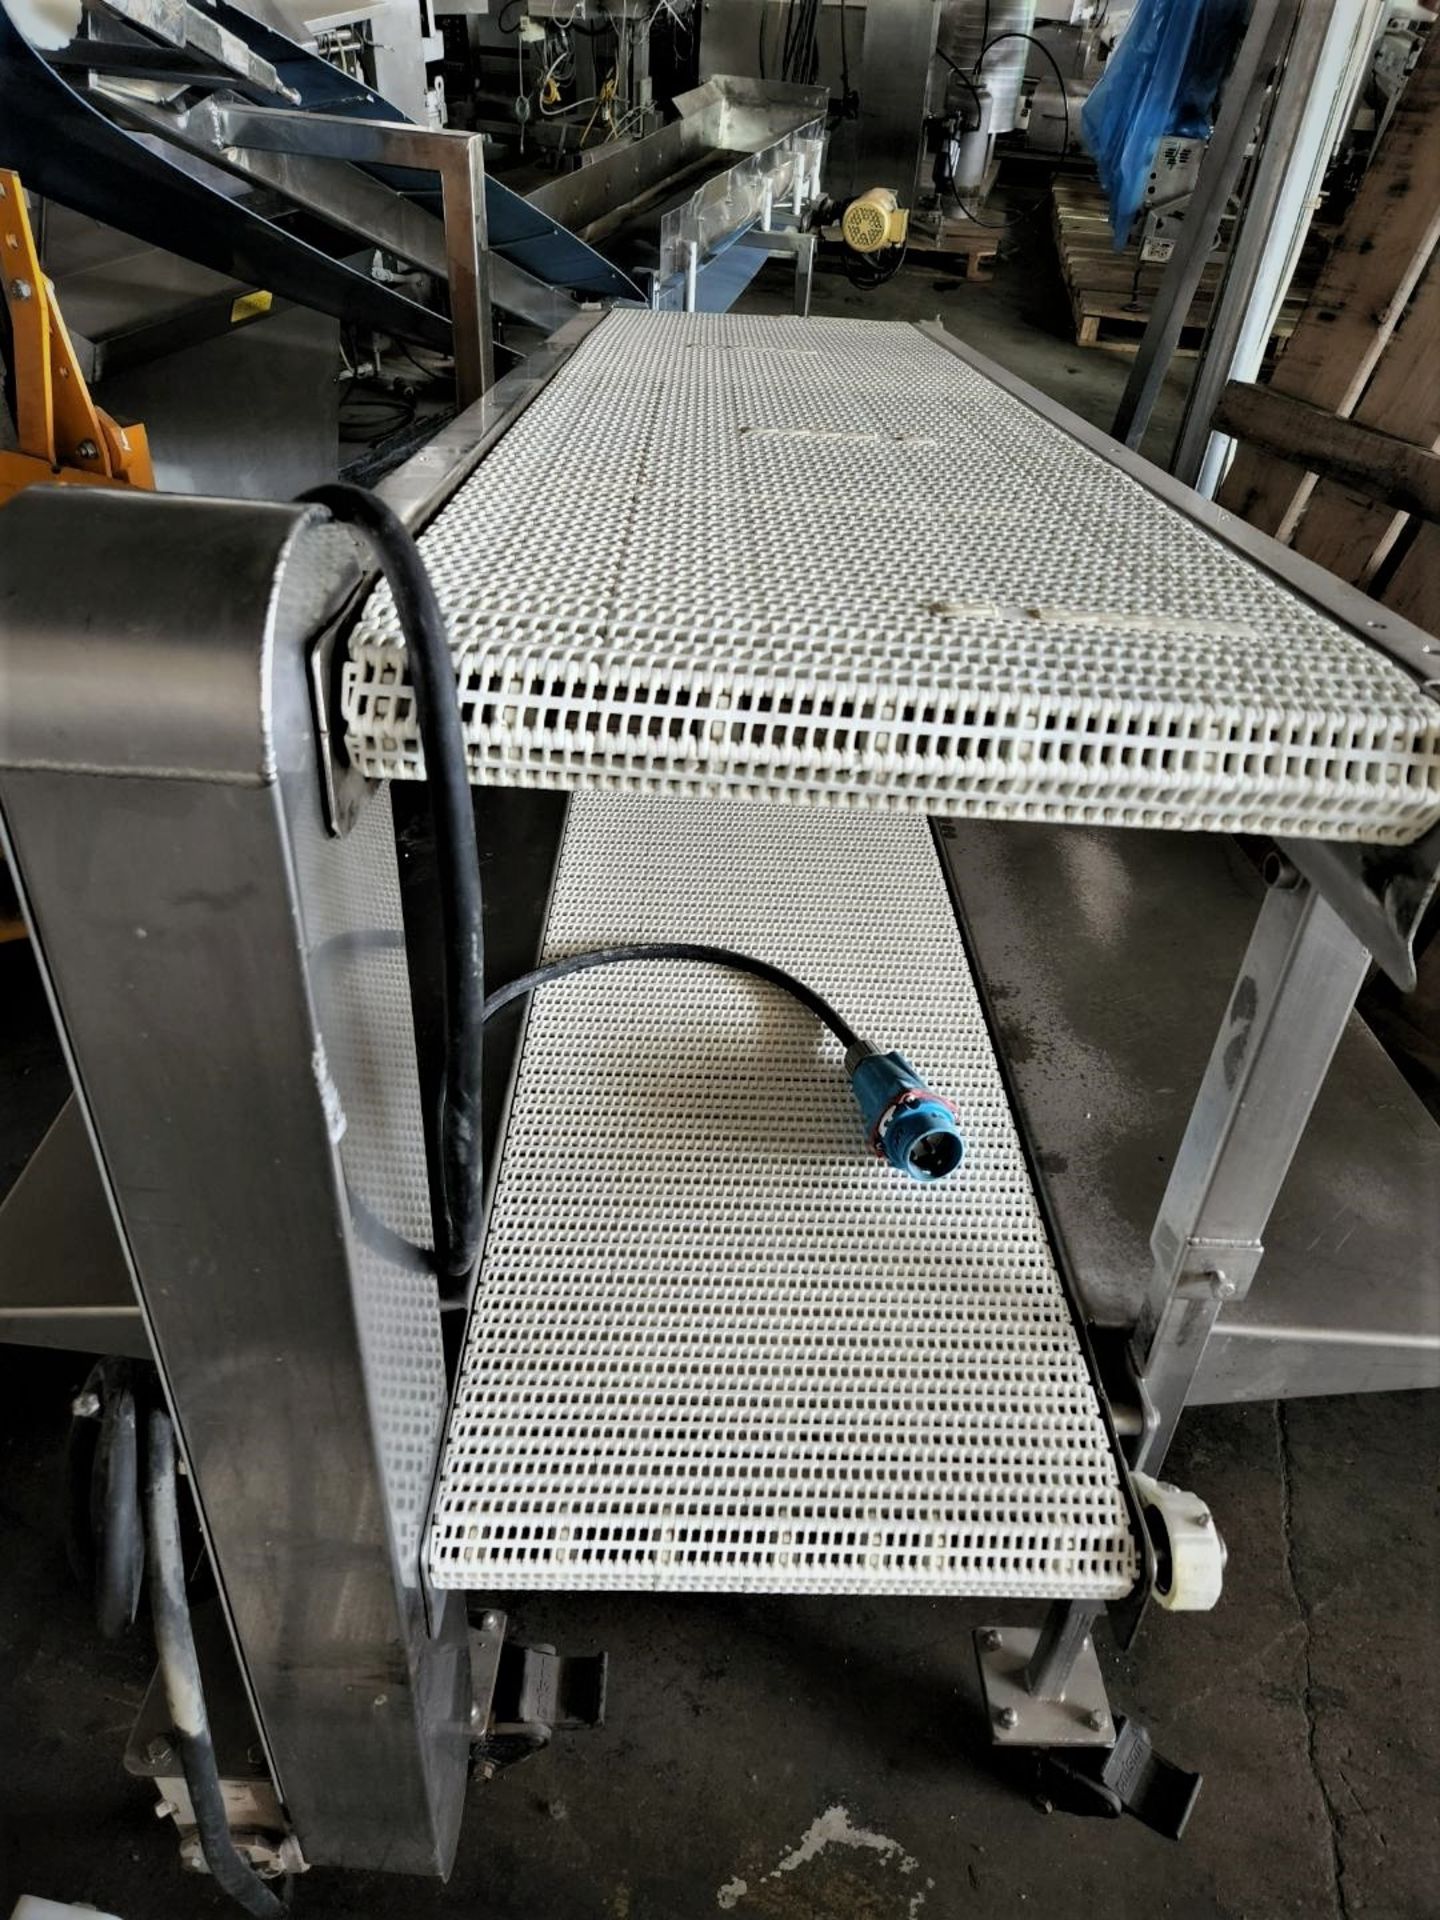 Dual Pack Off 18" S/S Sanitary Conveyor, Last Used in the food industry and remains in excellent - Image 5 of 5